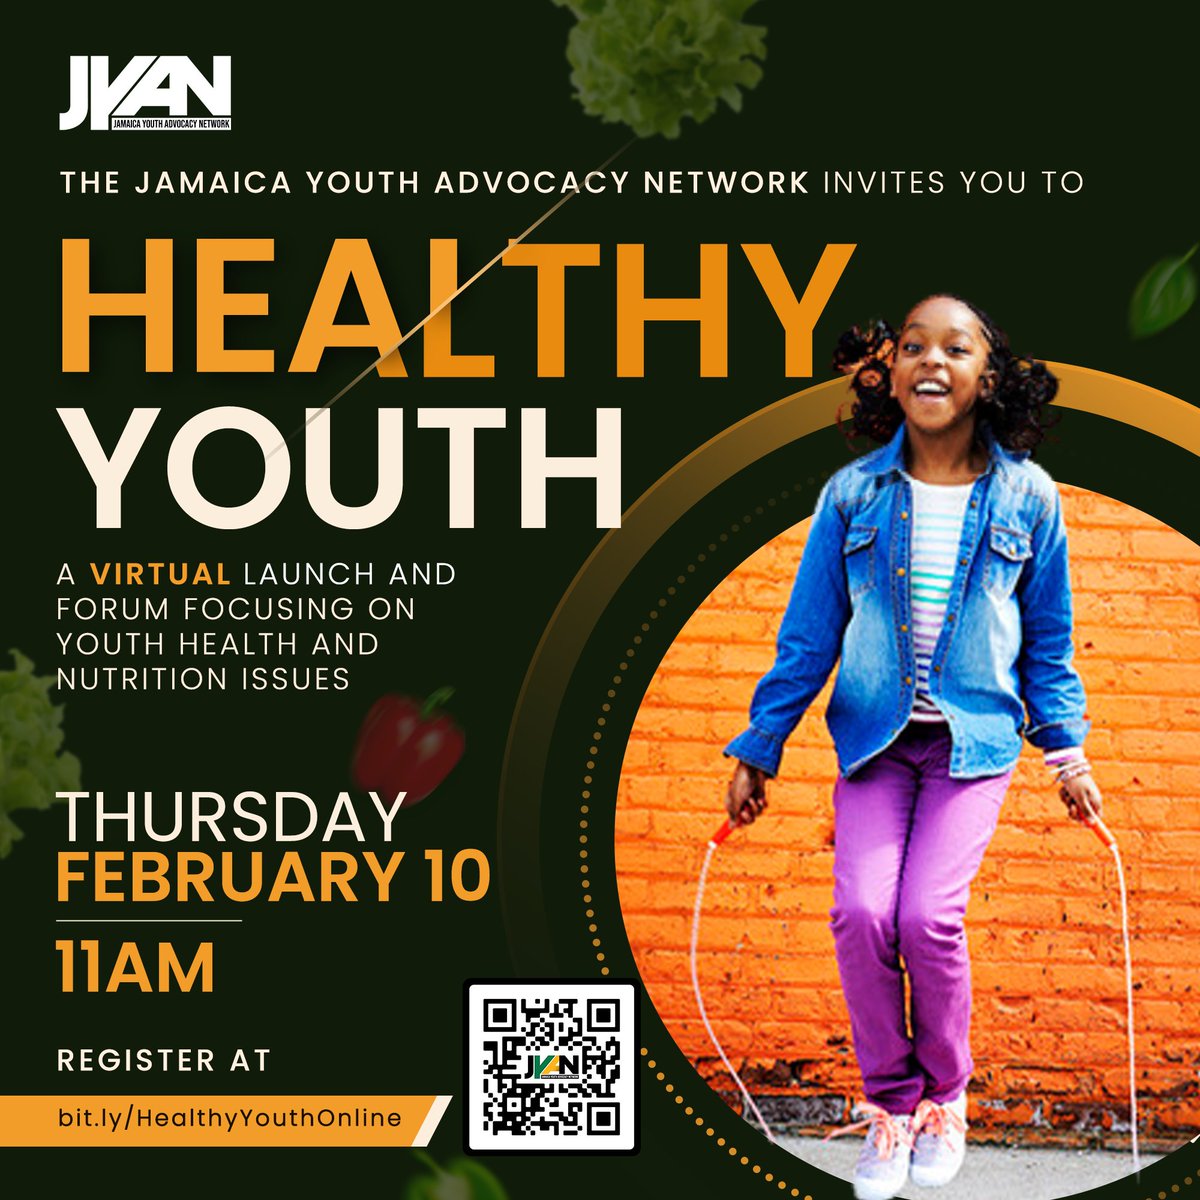 Healthy Youth will feature presentations from JYAN and experts from the Heart Foundation of Jamaica and Caribbean Institute for Health Research on the growing problem of NCDs among youth and how to address it. @themohwgovjm @heartjamaica @CAIHRJa @youthadvocateja @UNICEFJamaica